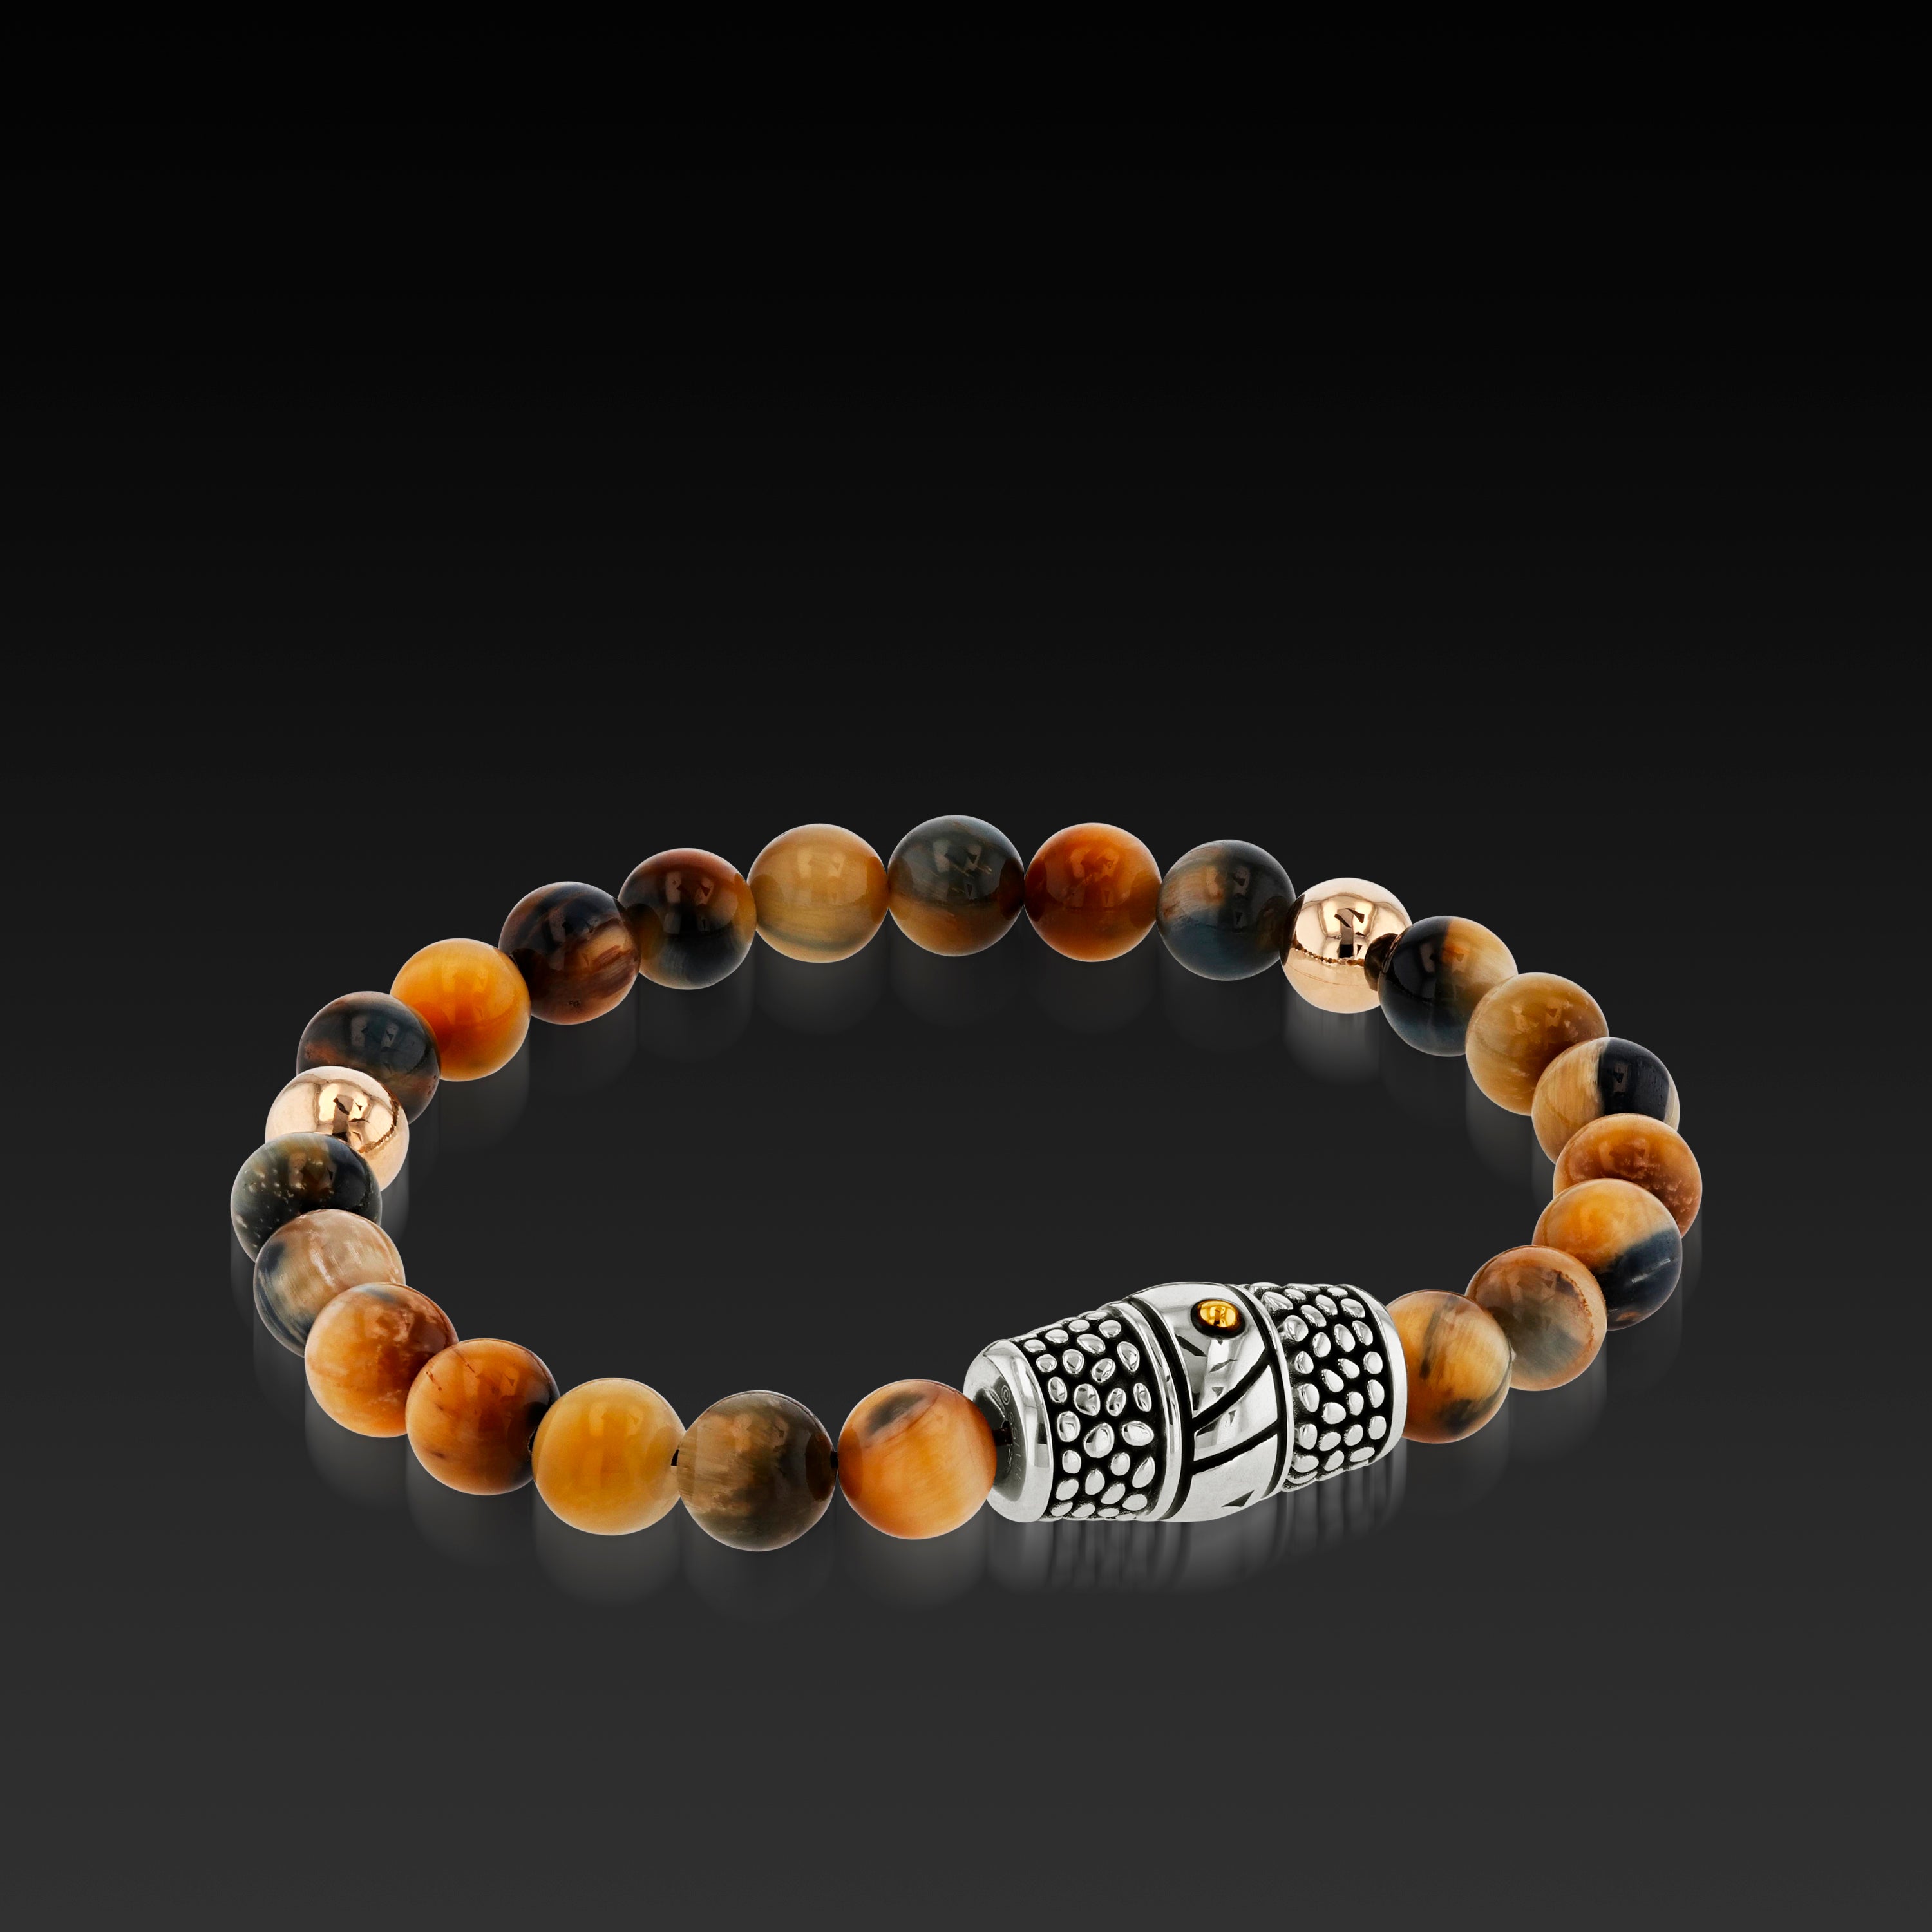 Brown Leather Bracelet with Tiger Eye Beads for Men